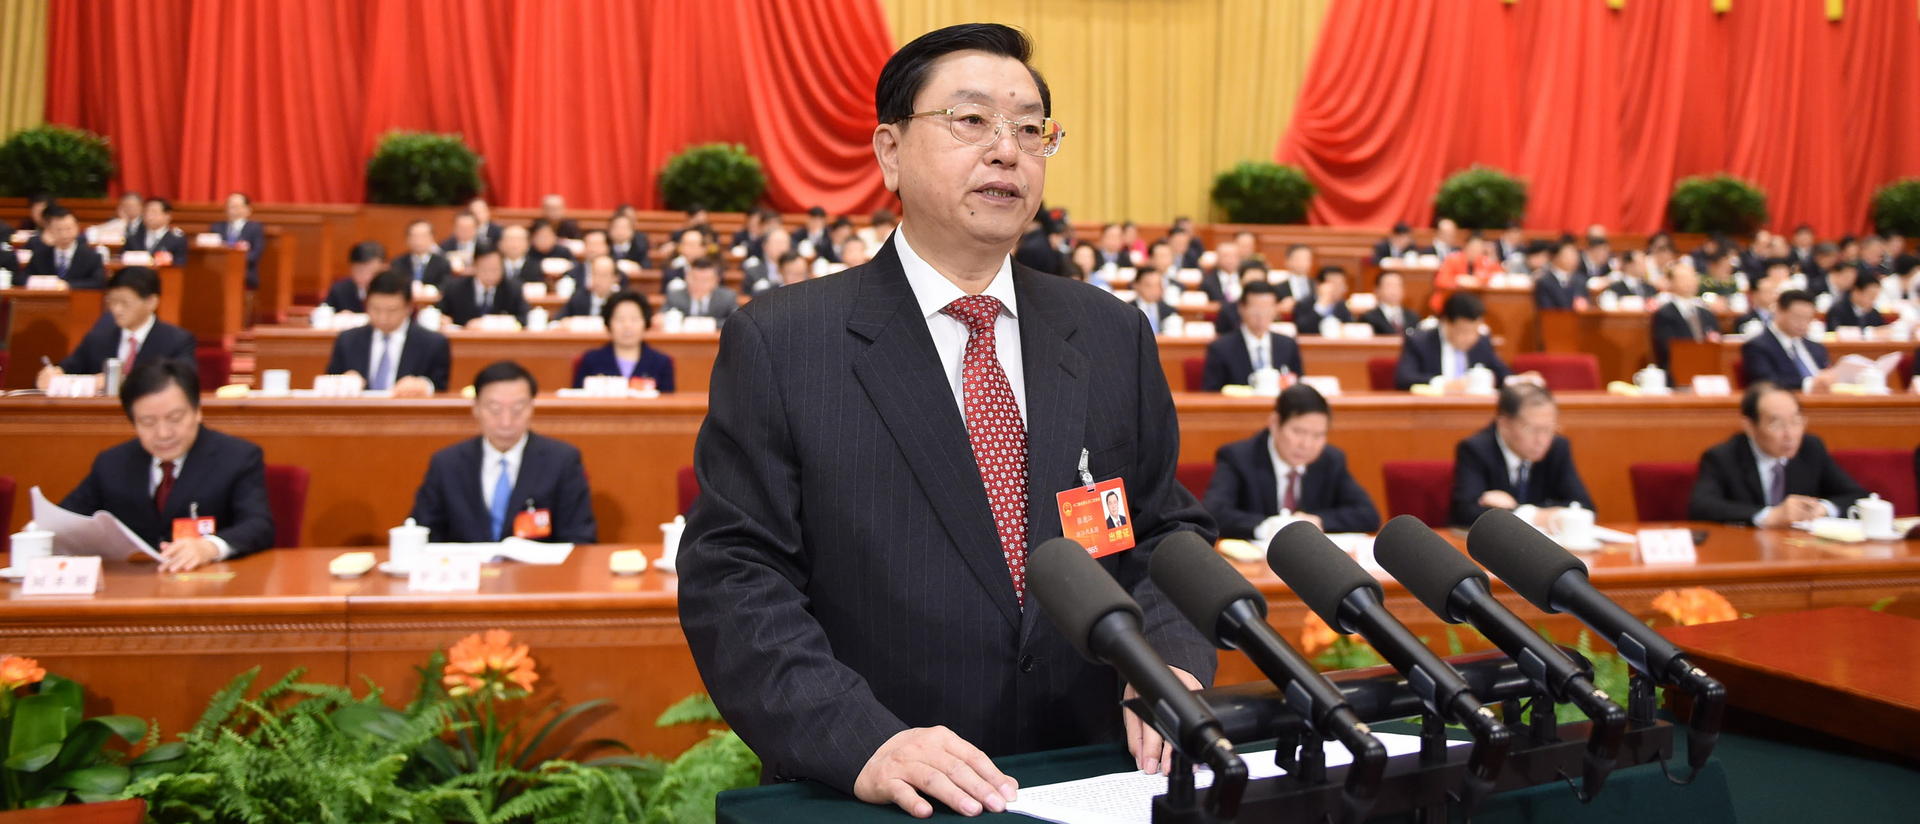 Zhang Dejiang, chairman of the Standing Committee of China's National People's Congress, delivers his work report. Photo: Xinhua